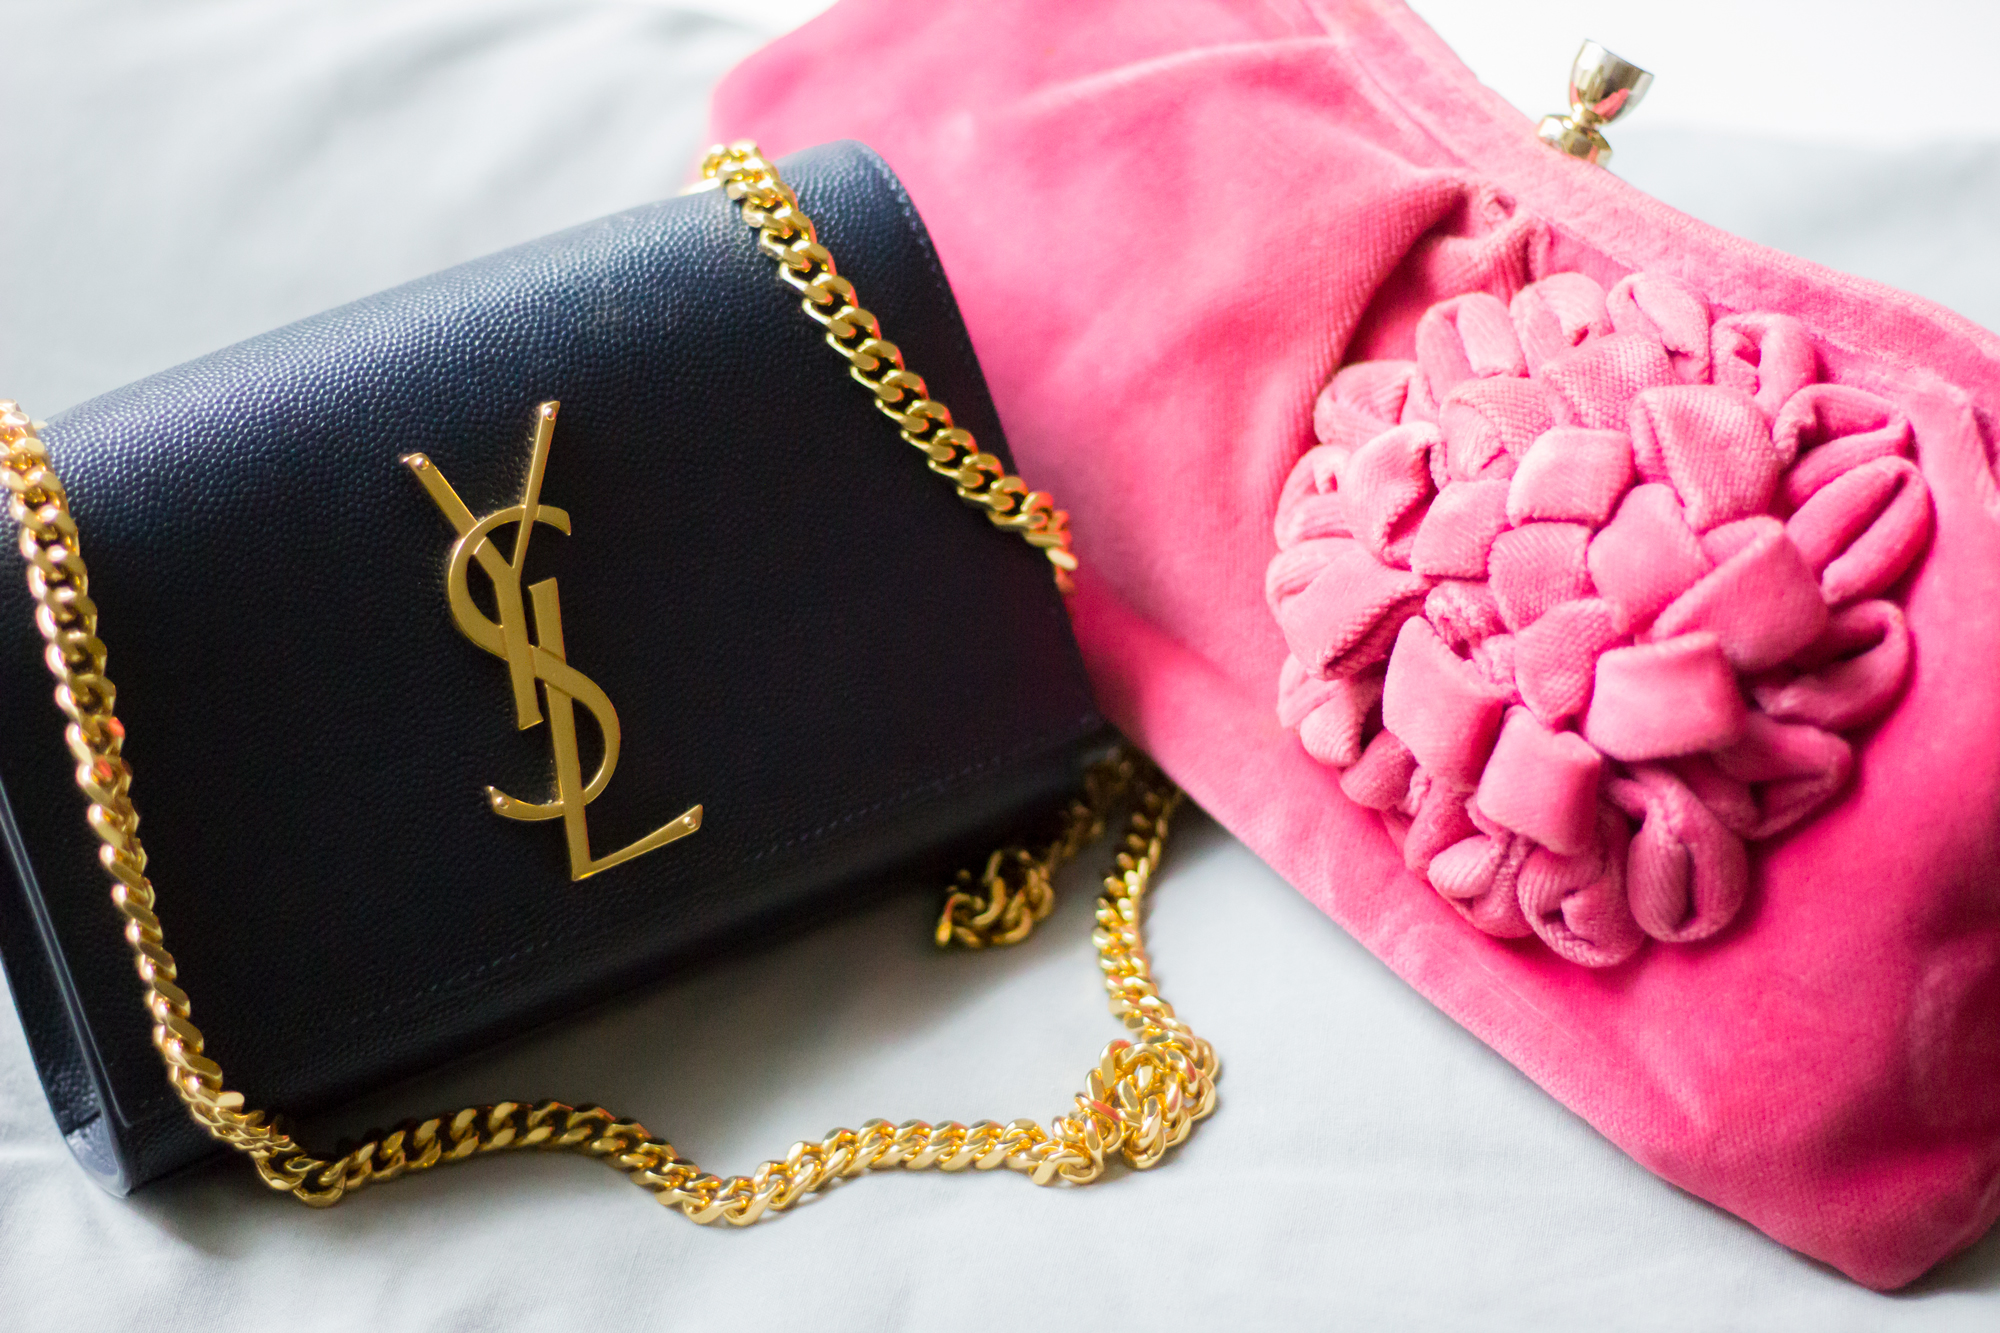 Fast Fashion vs. Investment Pieces